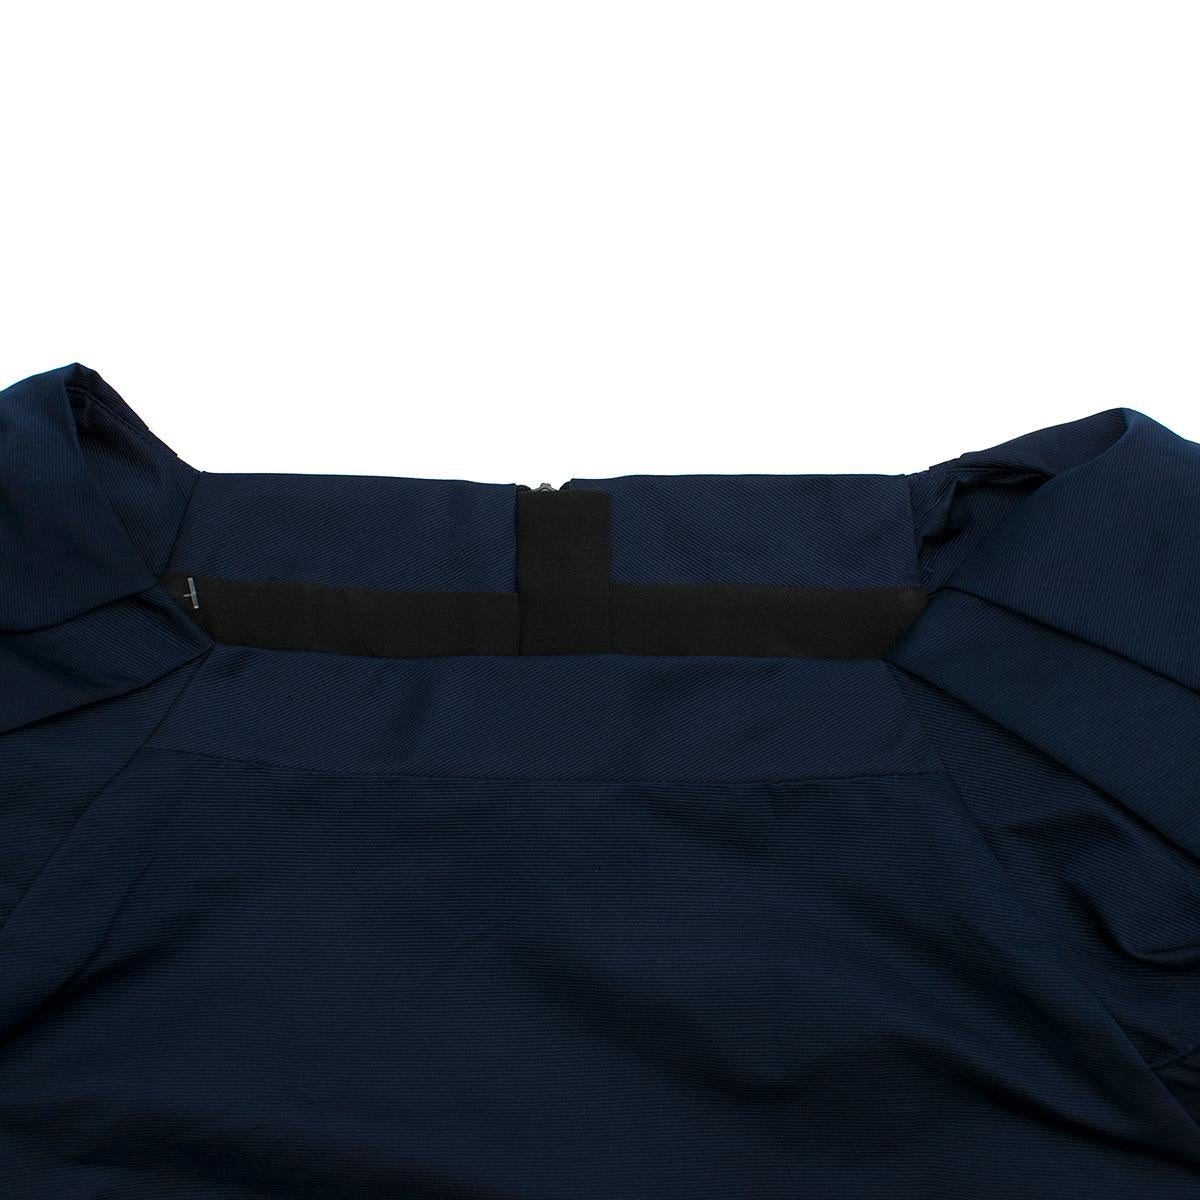 Burberry Prorsum Dark Blue Puff Sleeve Dress 

-Dark blue colour
-Short puffed sleeves
-Concealed back zip closure
-Straight neckline 

Please note, these items are pre-owned and may show some signs of storage, even when unworn and unused. This is